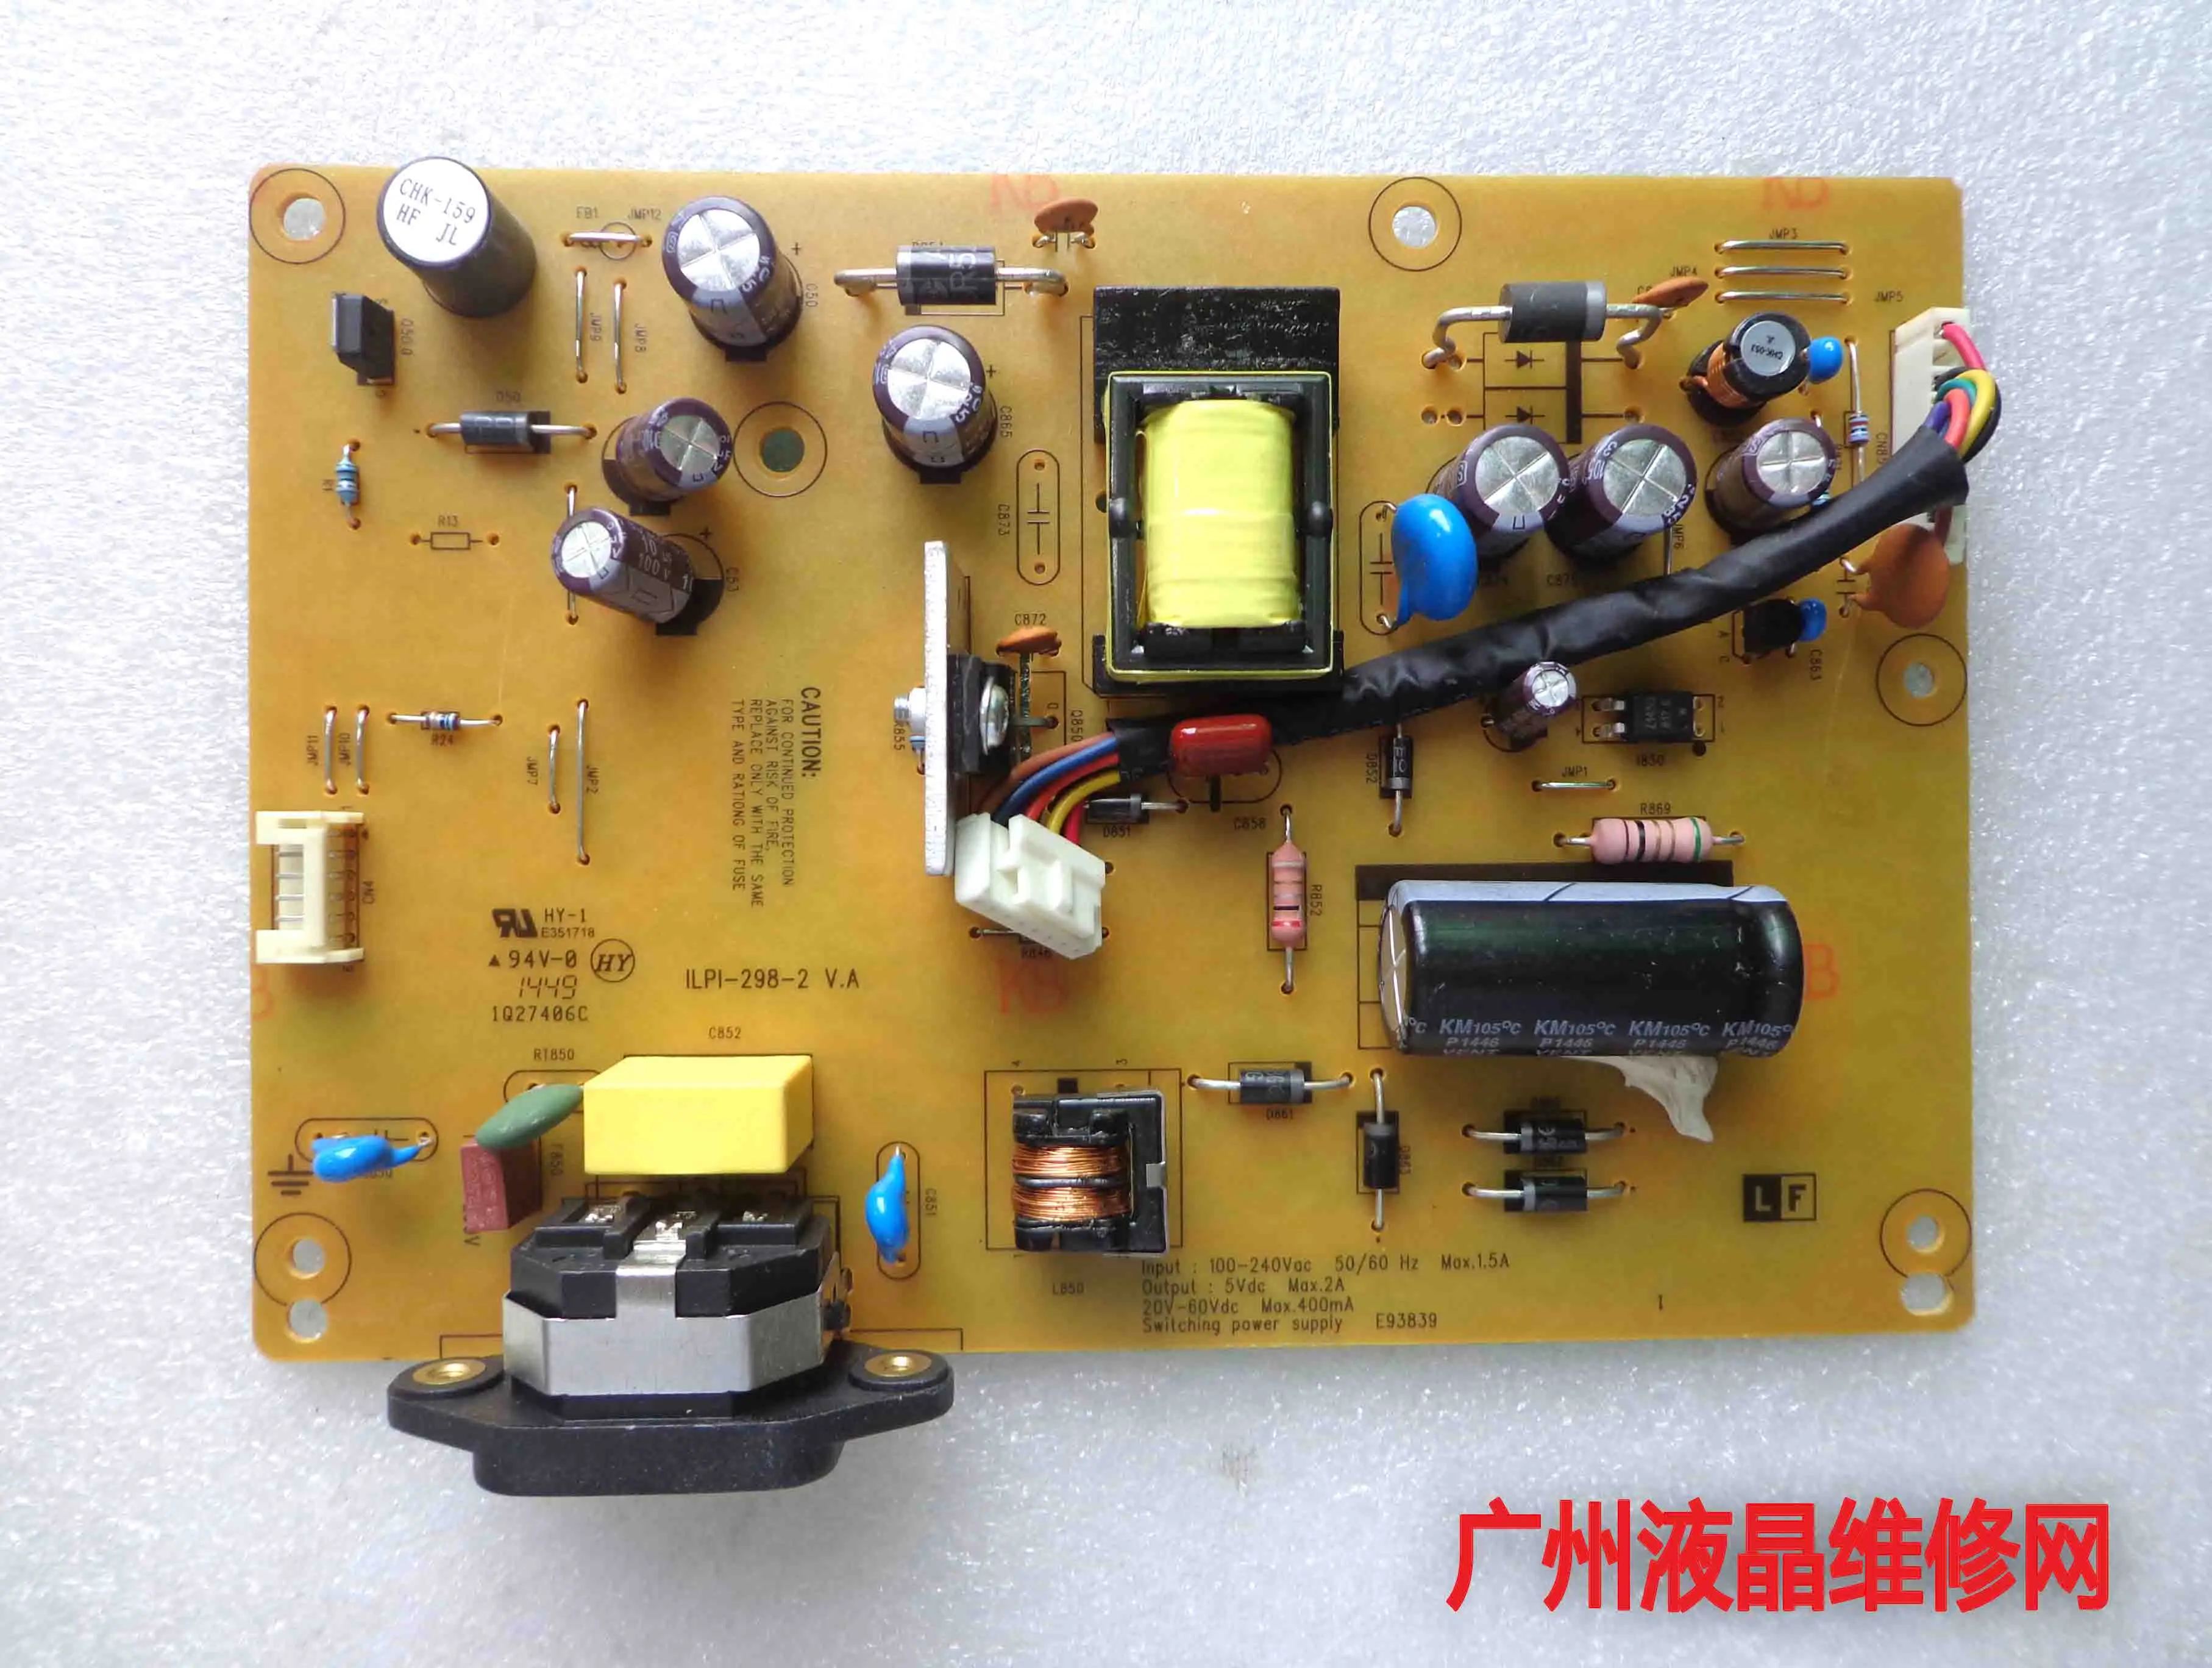 

LT2252wD ILPI-298-2 V.A power board pressure plate pin connector 6